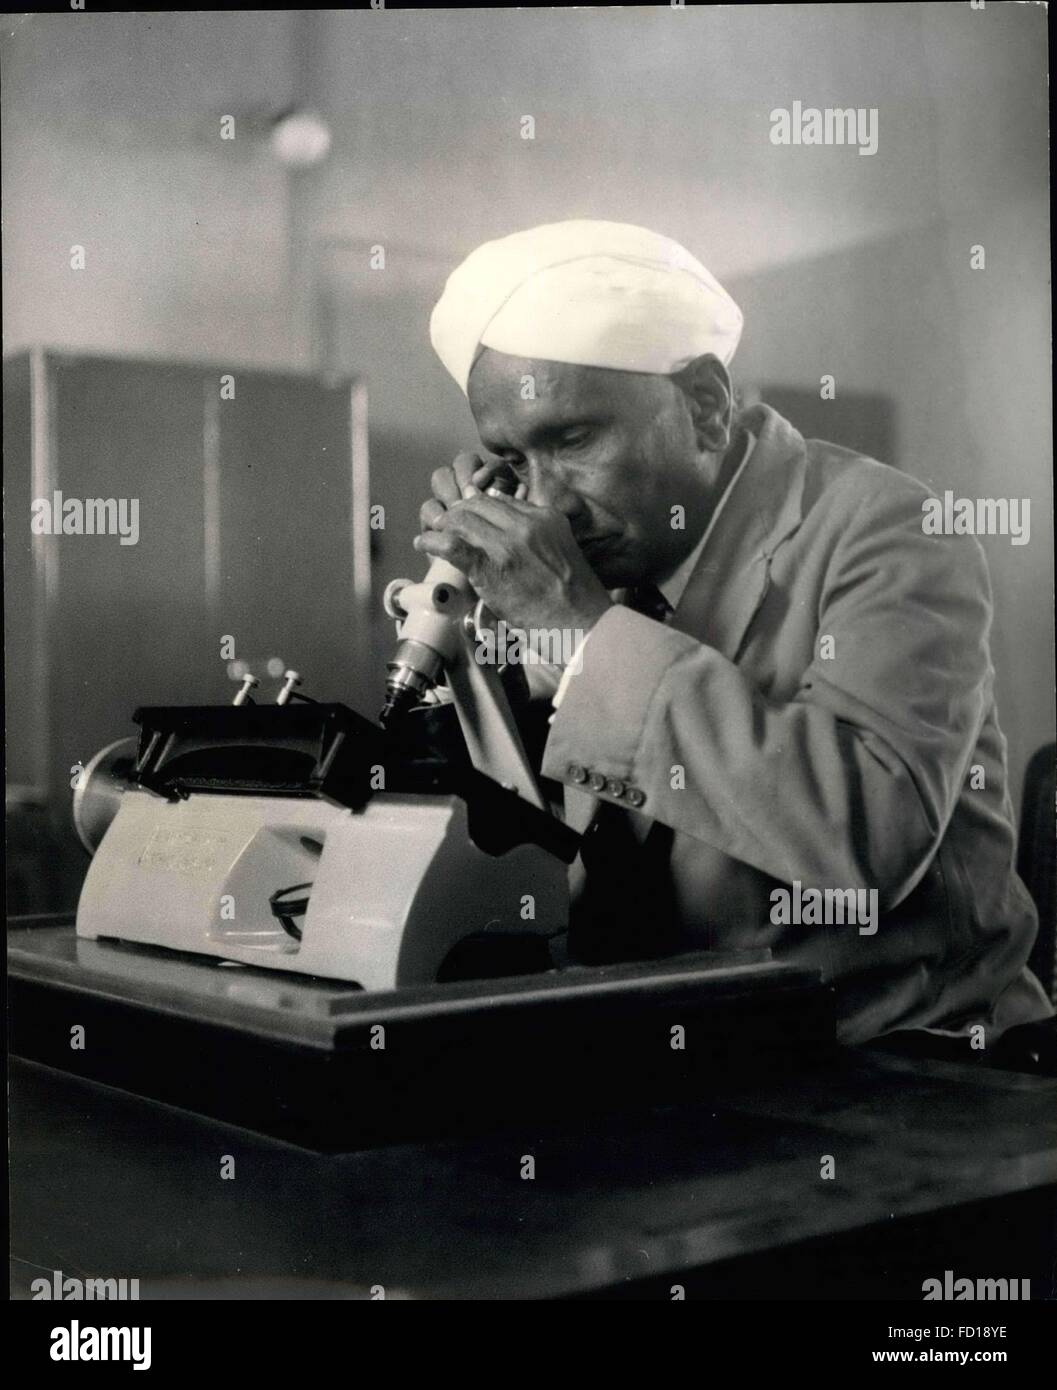 1968 - India's leading Scientist Evolves New Theory On Diamonds There Are Four Species Of The World's Most Precious Stone. Years of study in his laboratory have led Sir C.V.Raman, world-famous scientist, to declare a new theory on diamonds. This Nobel prize-winner, whose full name is Bharata Ratna Raja-Sabhabhushana Sir Chandrasekhara Venkata Raman Kt., recent winner of the Lenin Peace Prize and discoverer of the Raman Spectrum and many chemical advances of use in the Oil industry, claims that there are four and not one type of diamond. In his Mysore Laboratory, in the Raman Research Institute Stock Photo